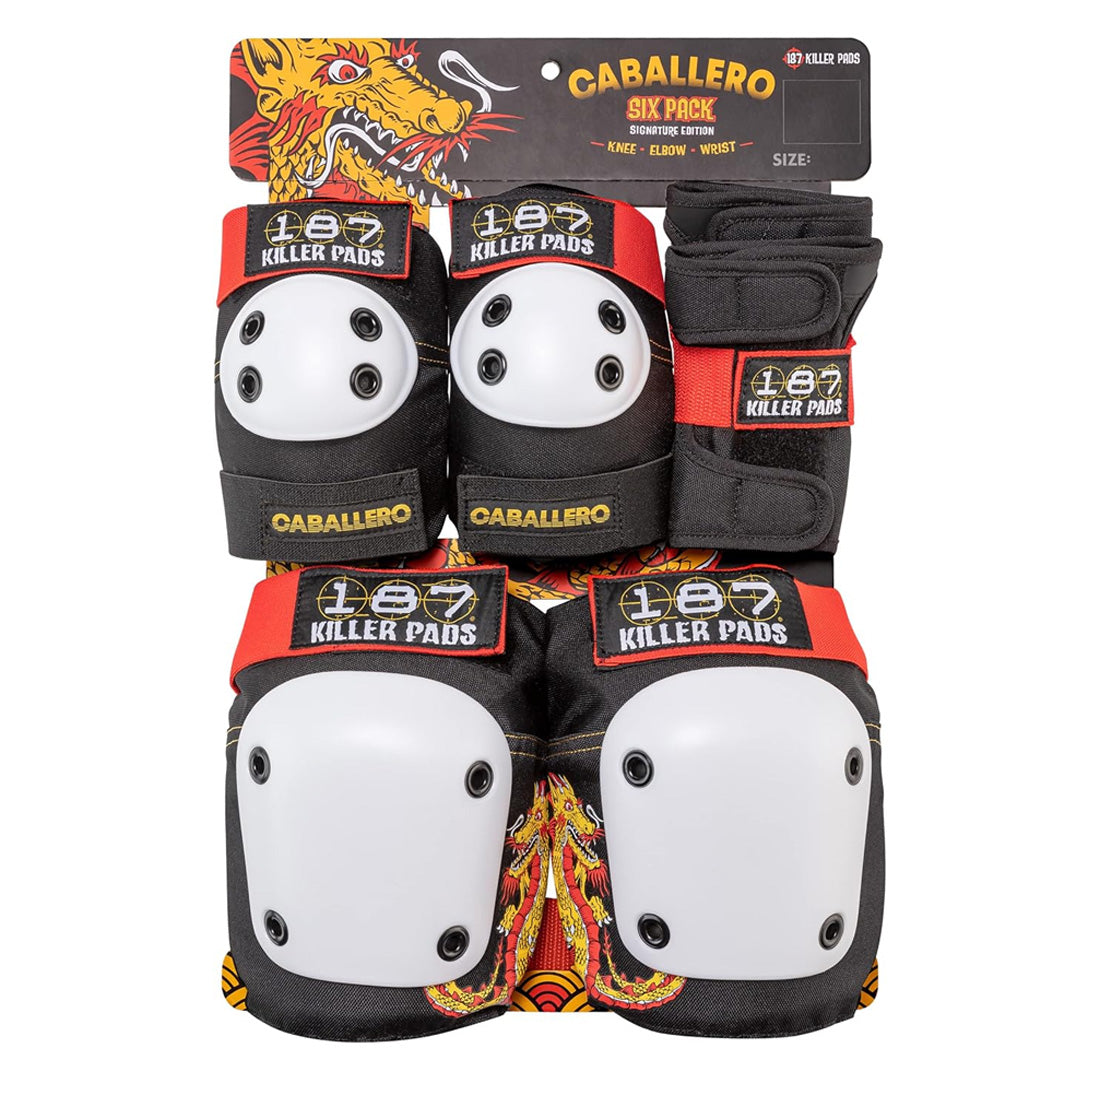 187 Killer Pads - Lizzie Armanto Six Pack - Adult Knee, Elbow & Wrist  Safety Gear set